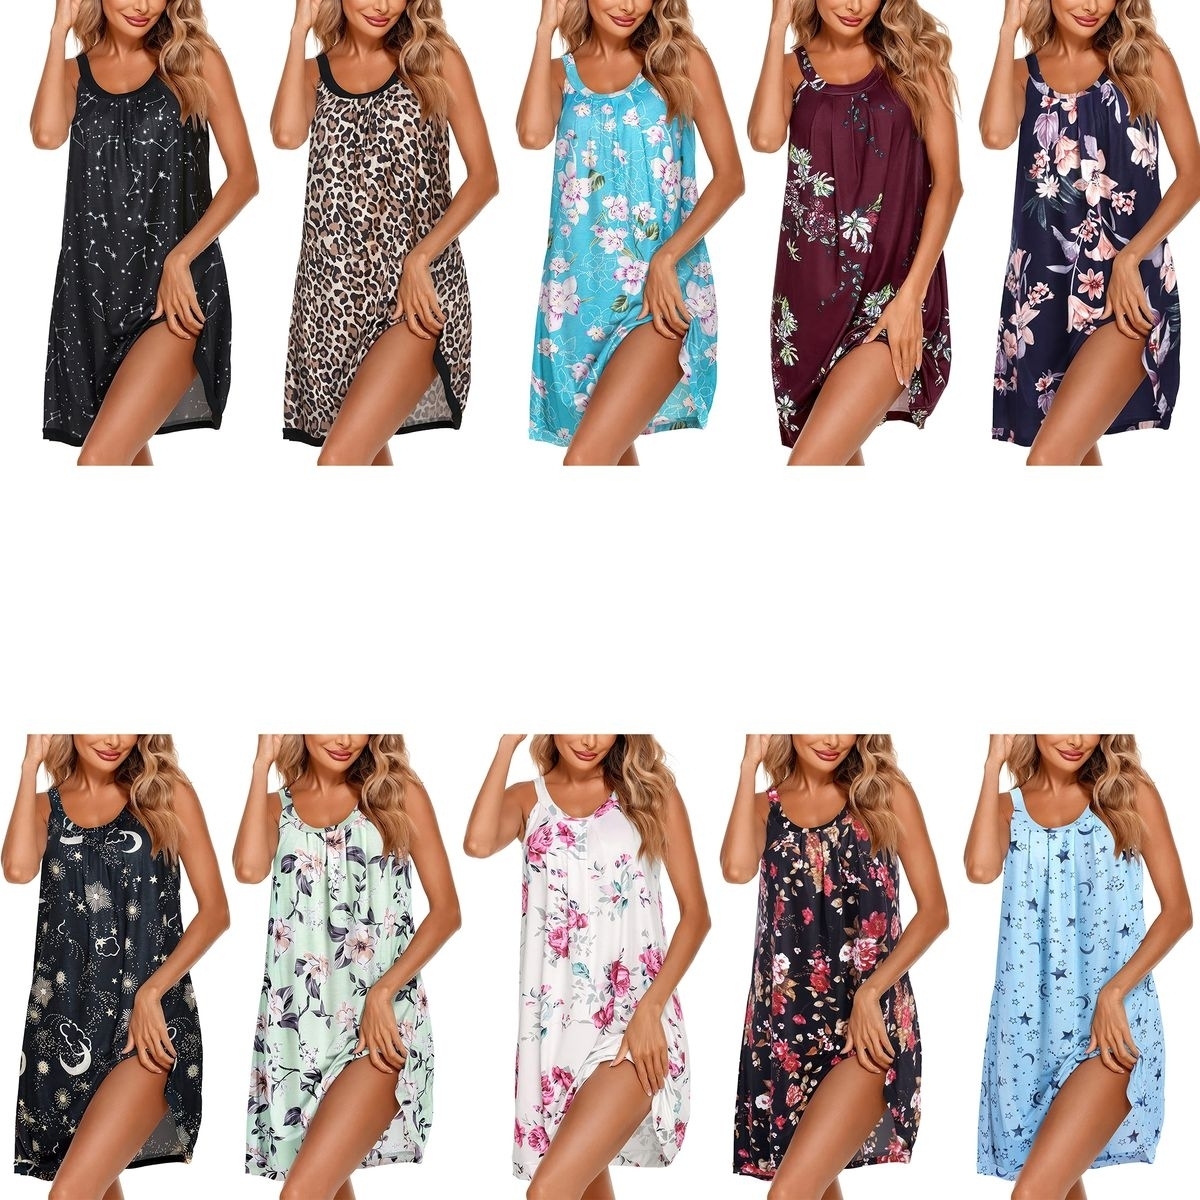 4-Pack: Women's Ultra-Soft Cozy Sleeveless Loose Fit Lightweight Cozy Nightgown SleepShirt - Small, Floral